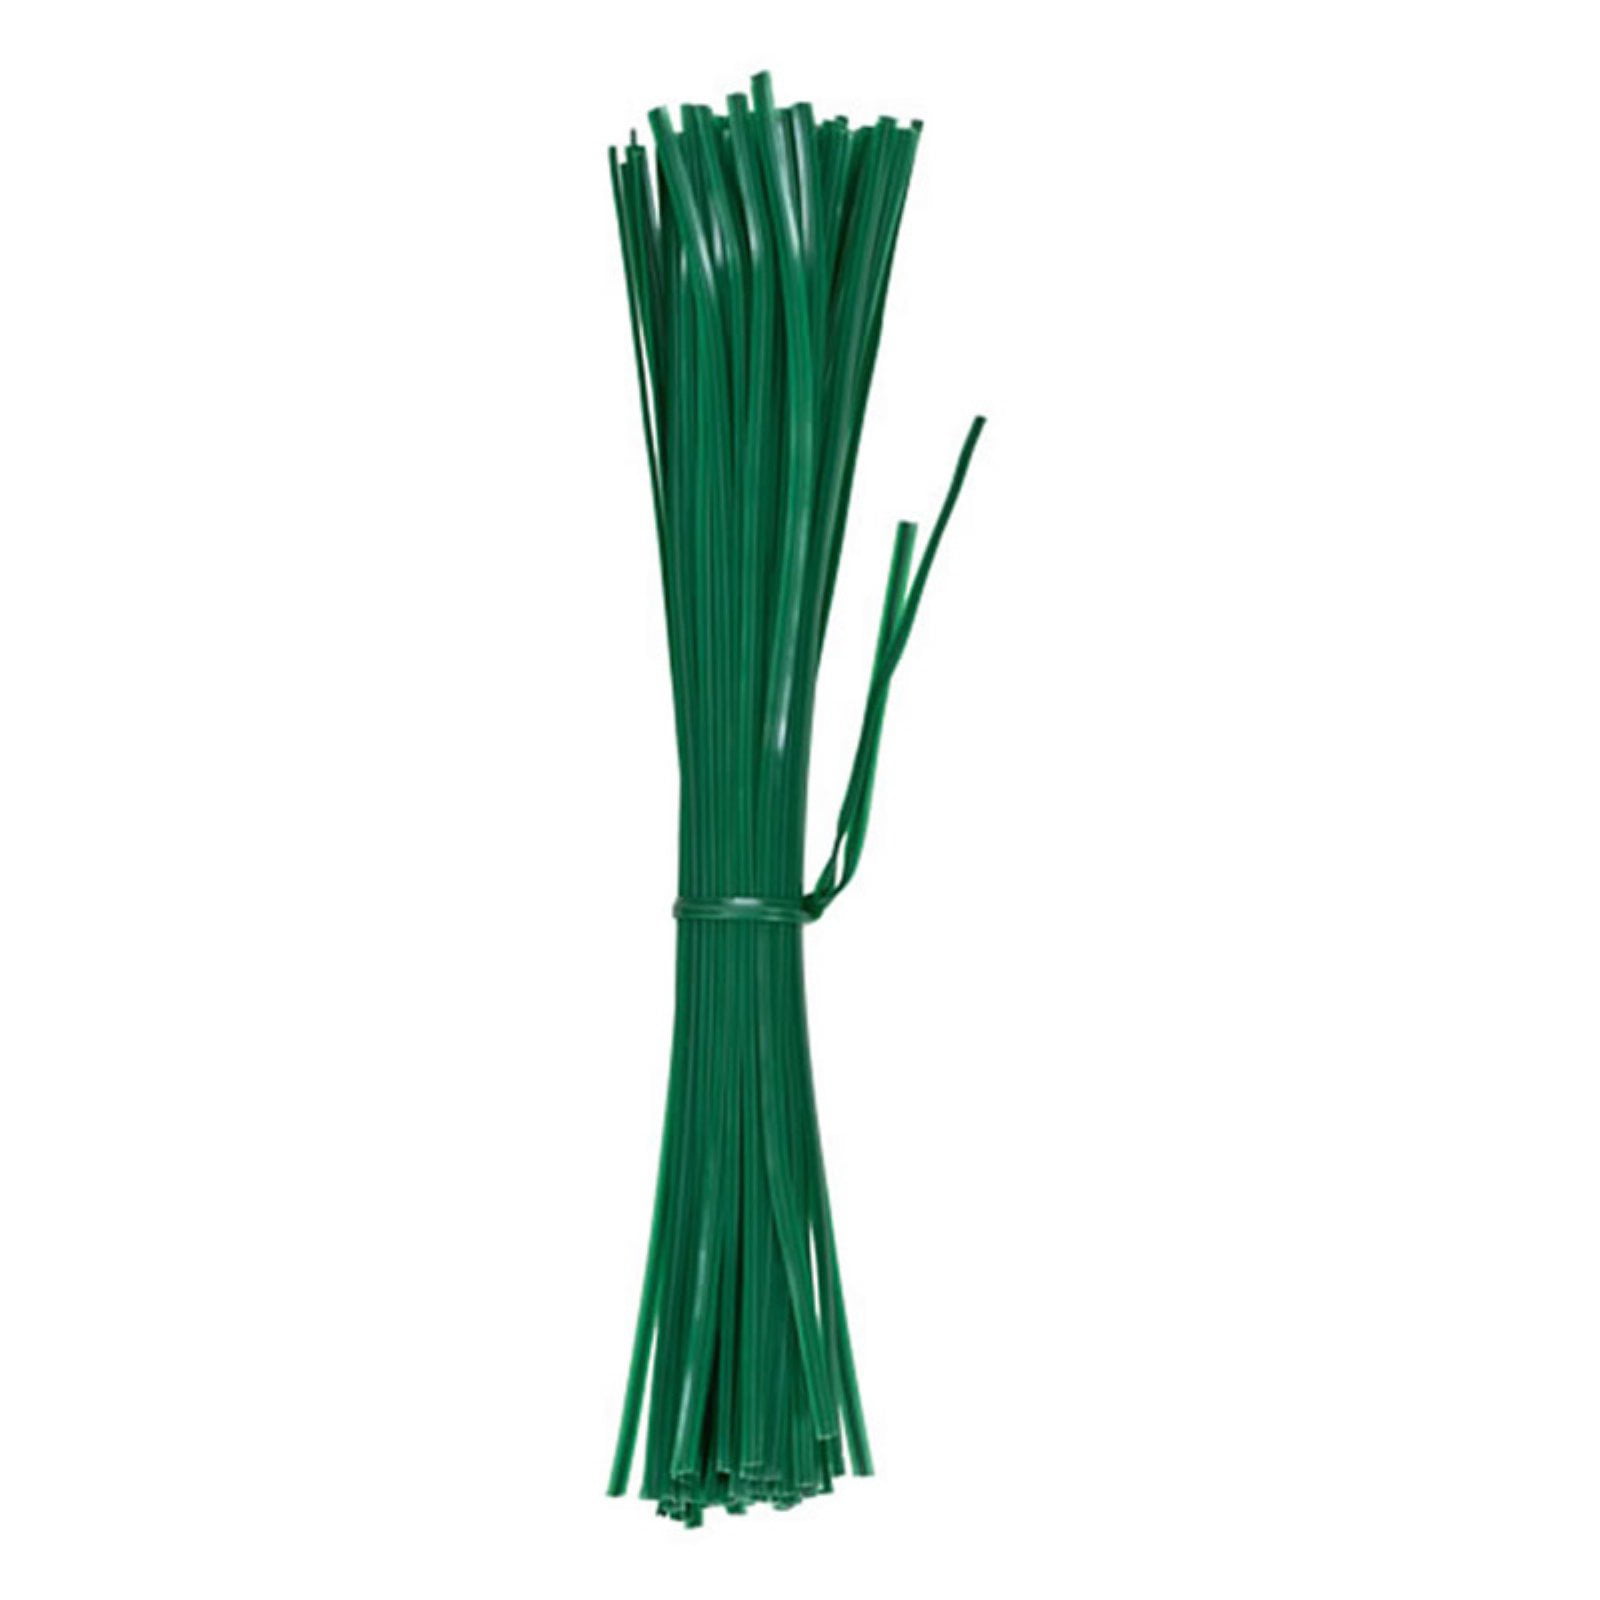 W for sale online X 4 In Bond 1180PDQ Green Plastic Coated Wire Ties 160 L Ft 